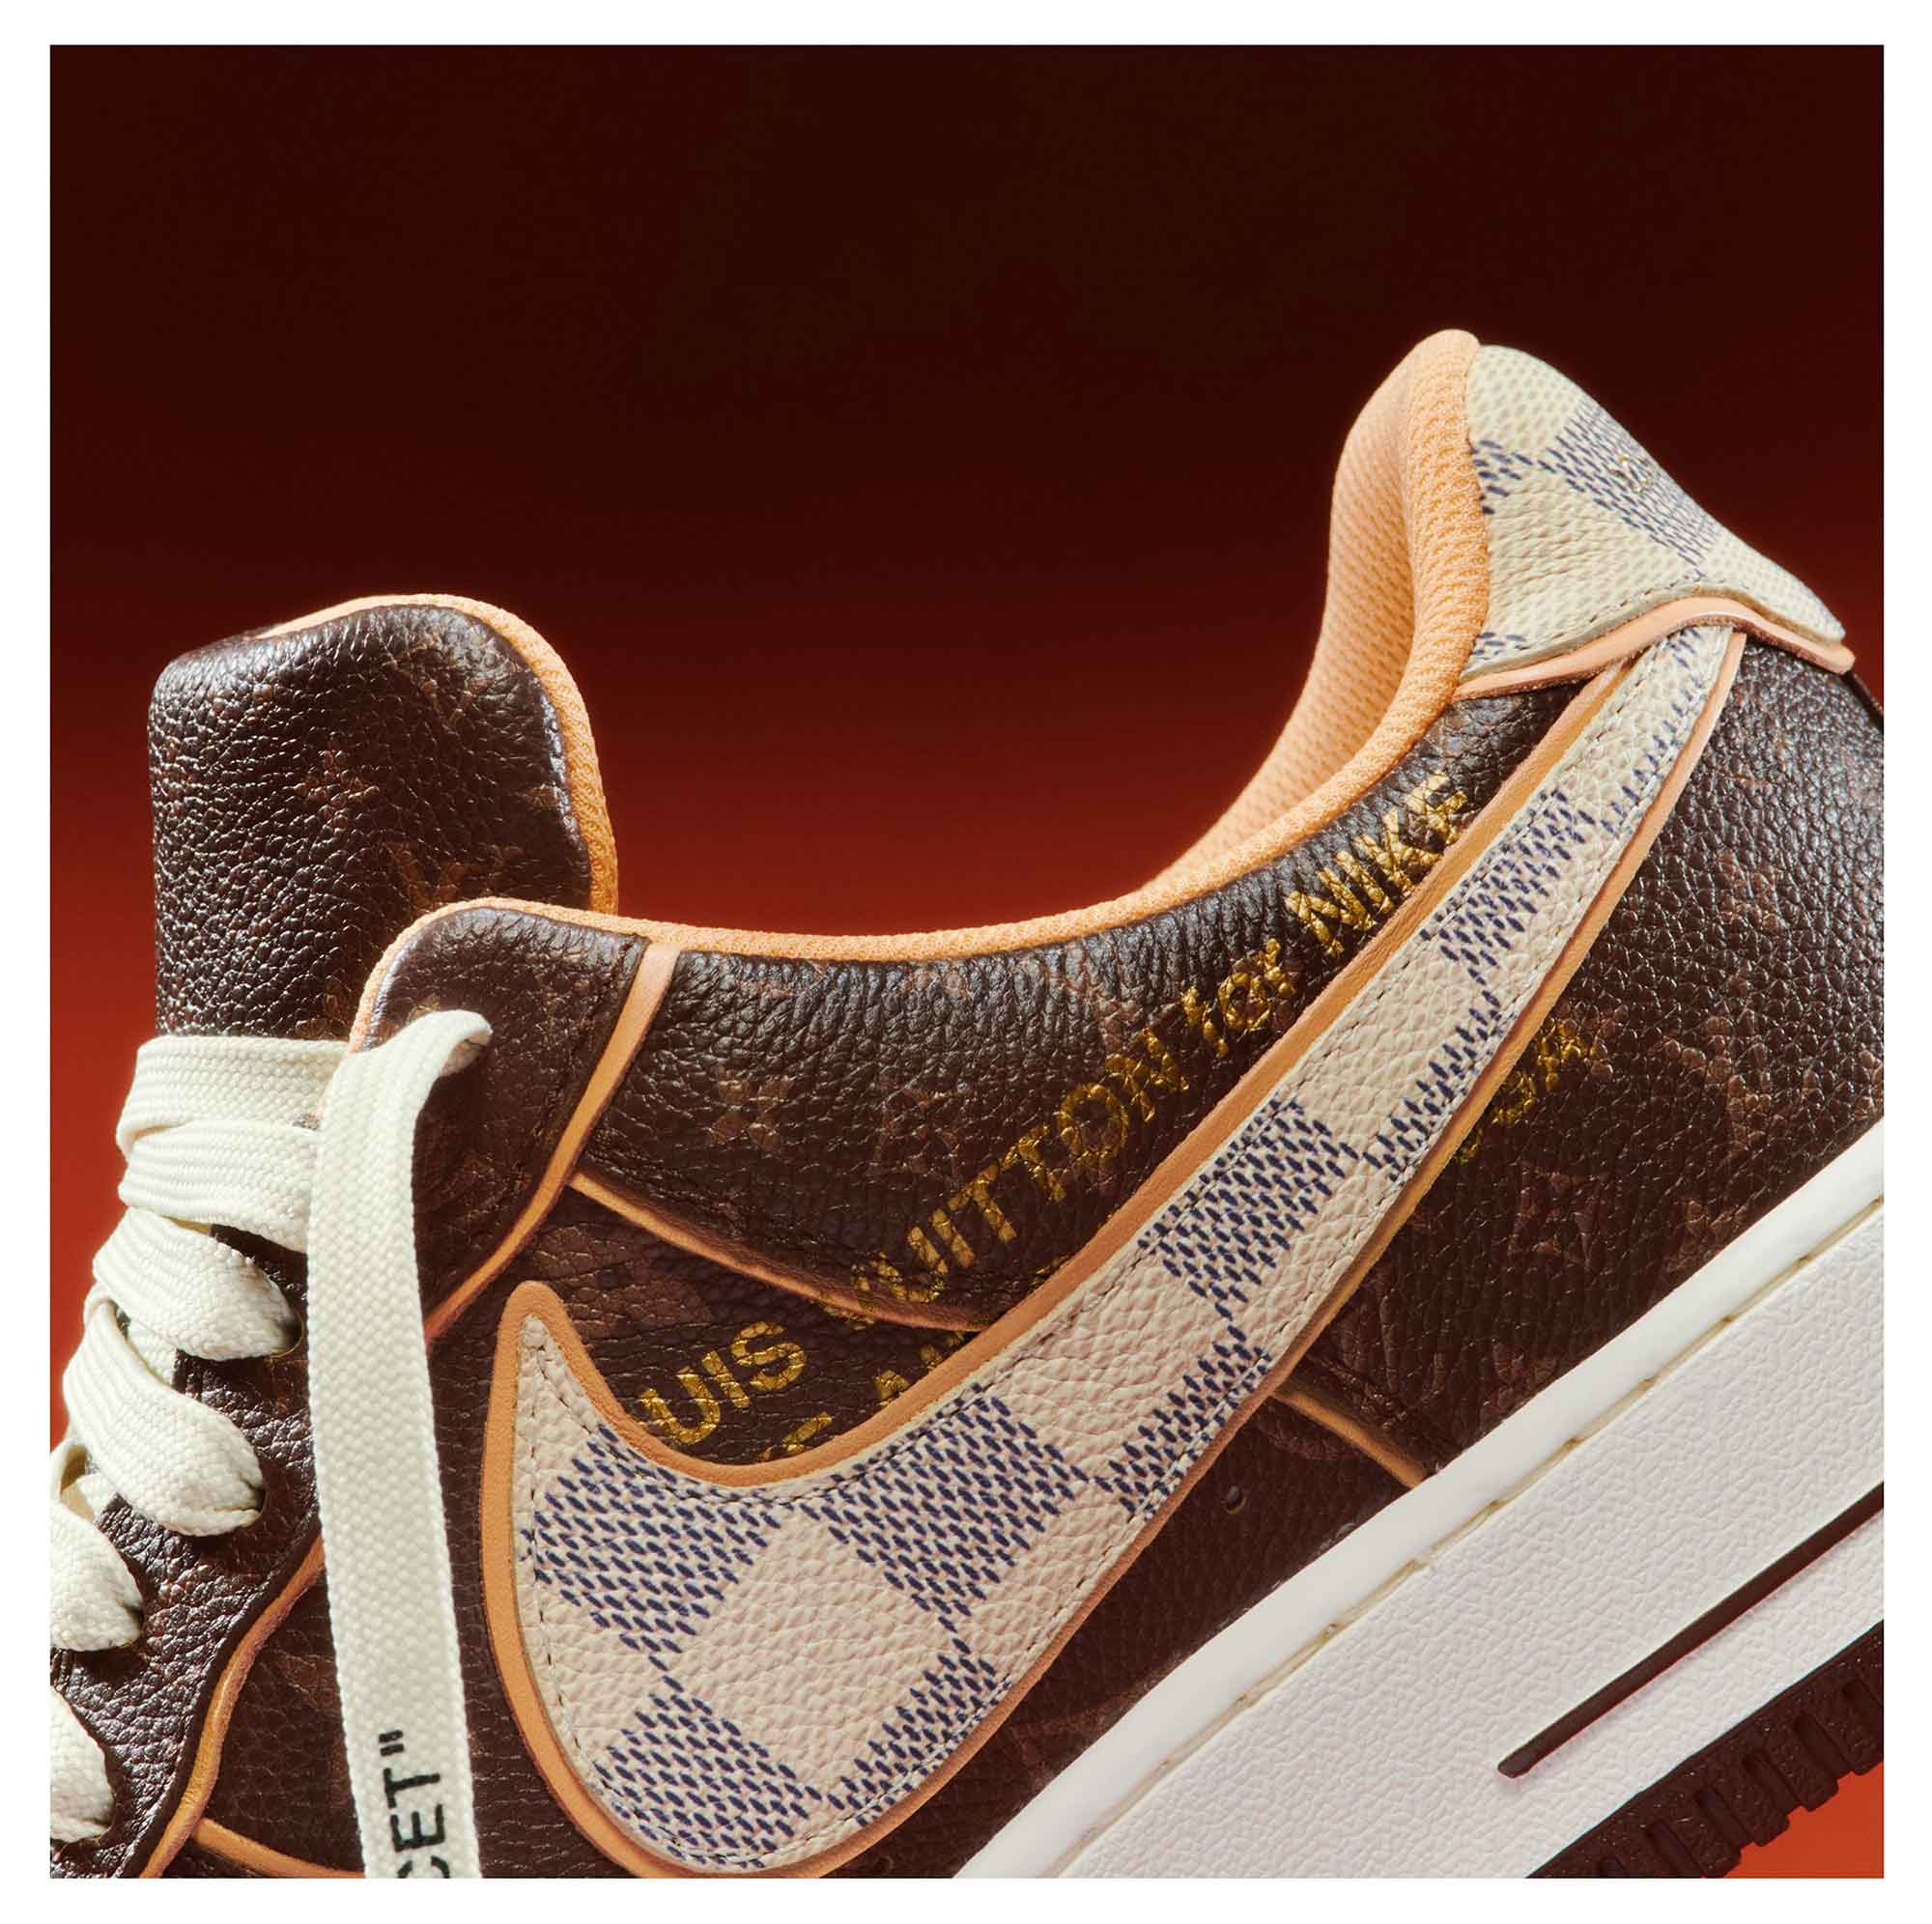 Virgil Abloh limited edition sneaker collection fetch $25 million at  Sotheby's